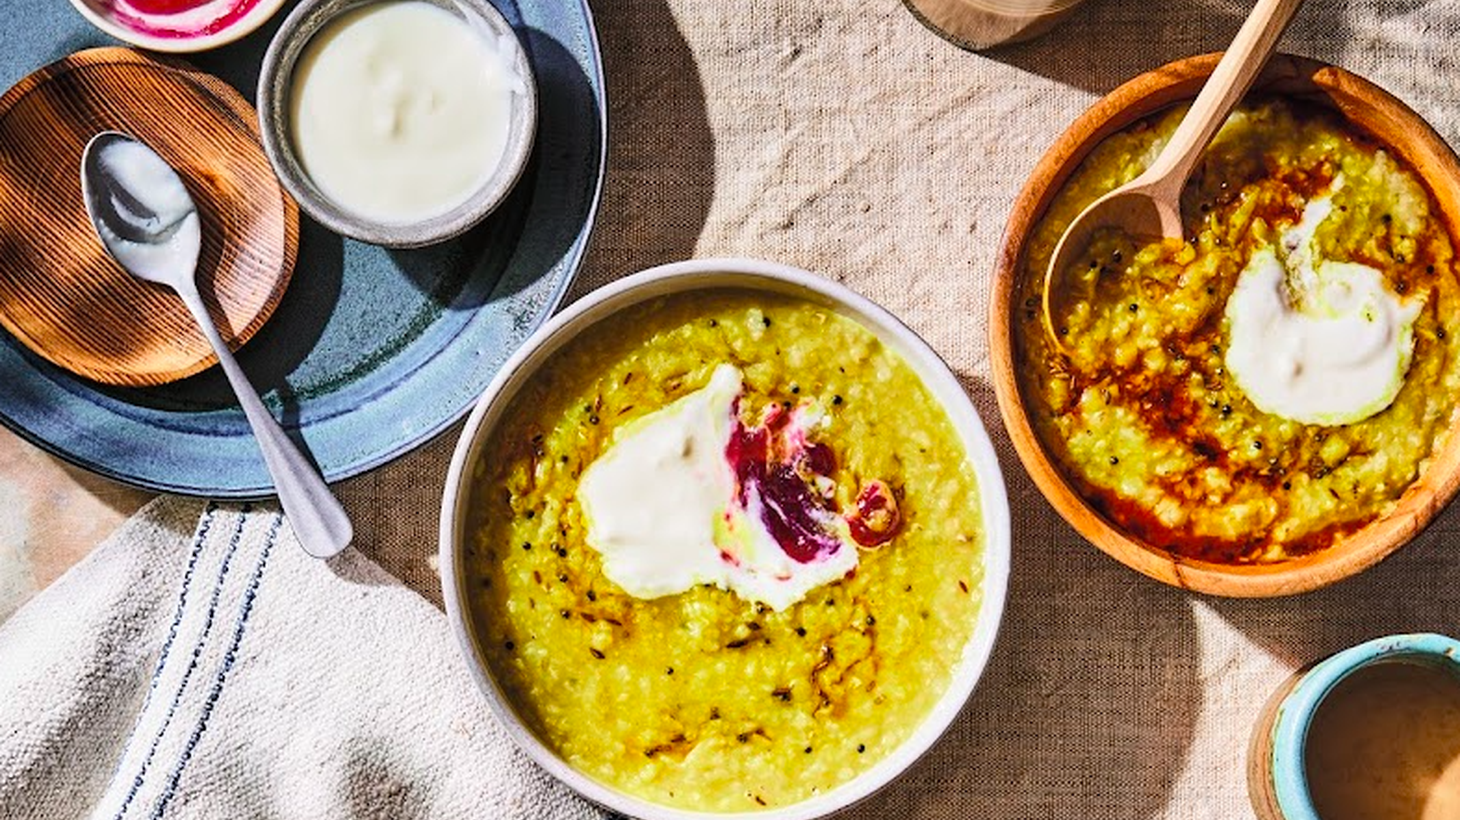 Noah Galuten shares his brother's recipe for kitchari, a rice and lentil dish with ghee and turmeric.